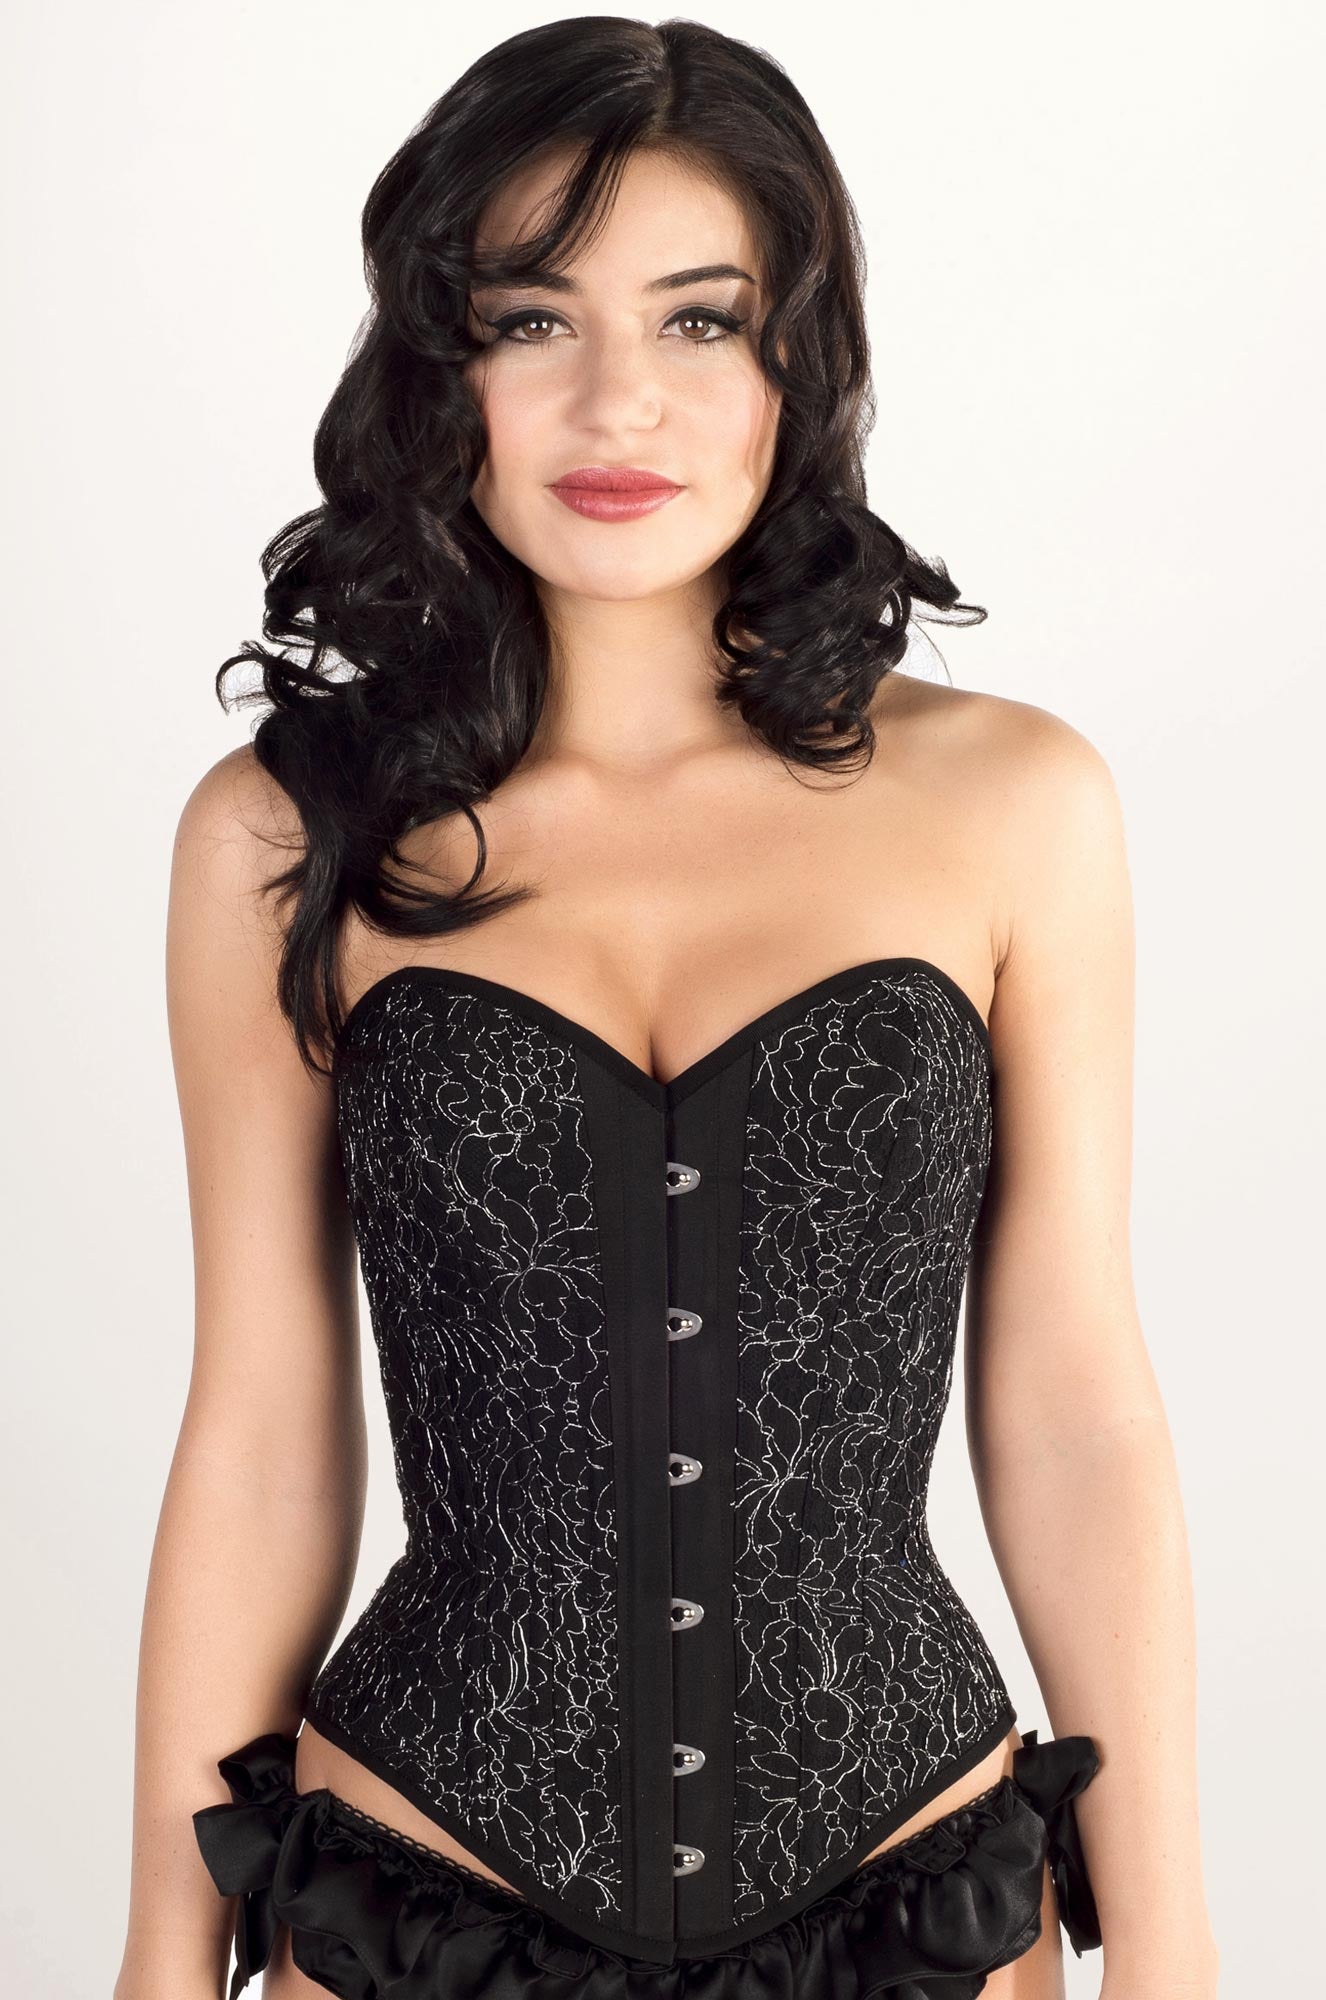 Black lace Lavinia corset in the old hollywood style with silver trim